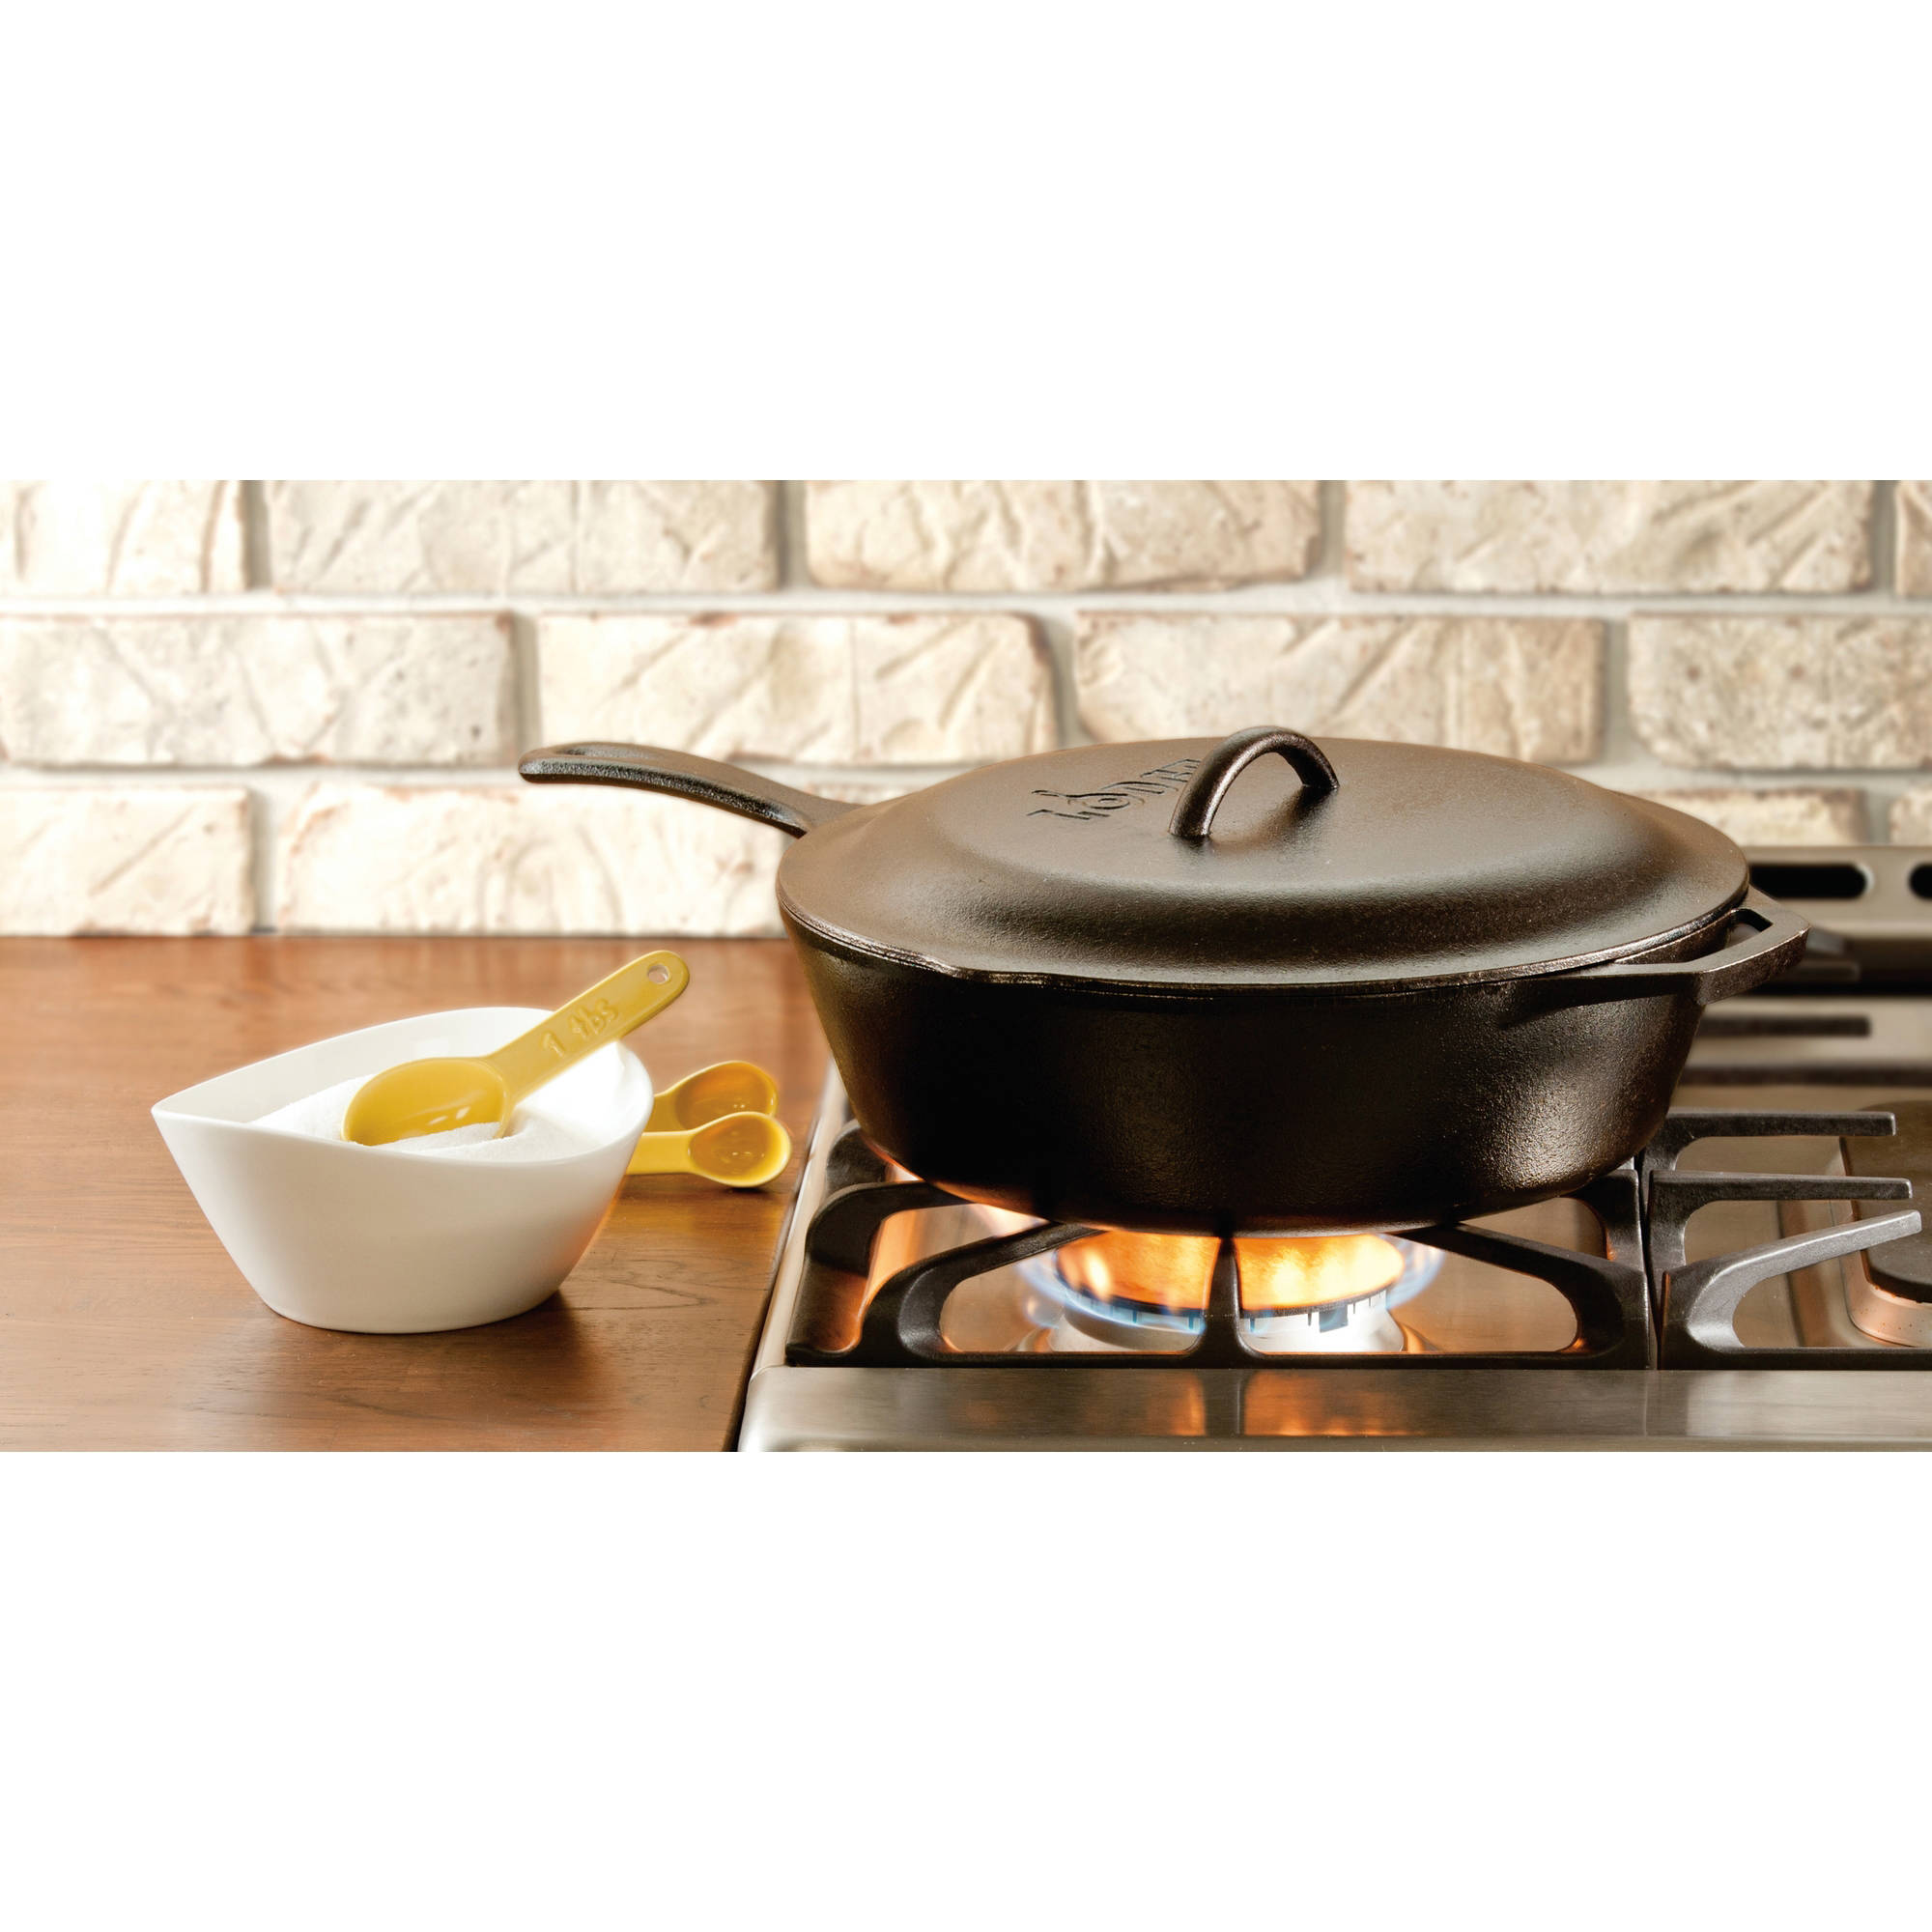 Lodge Cast Iron Pre-Seasoned Deep Skillet with Iron Cover and Assist Handle, 5 Quart, Black - image 2 of 8